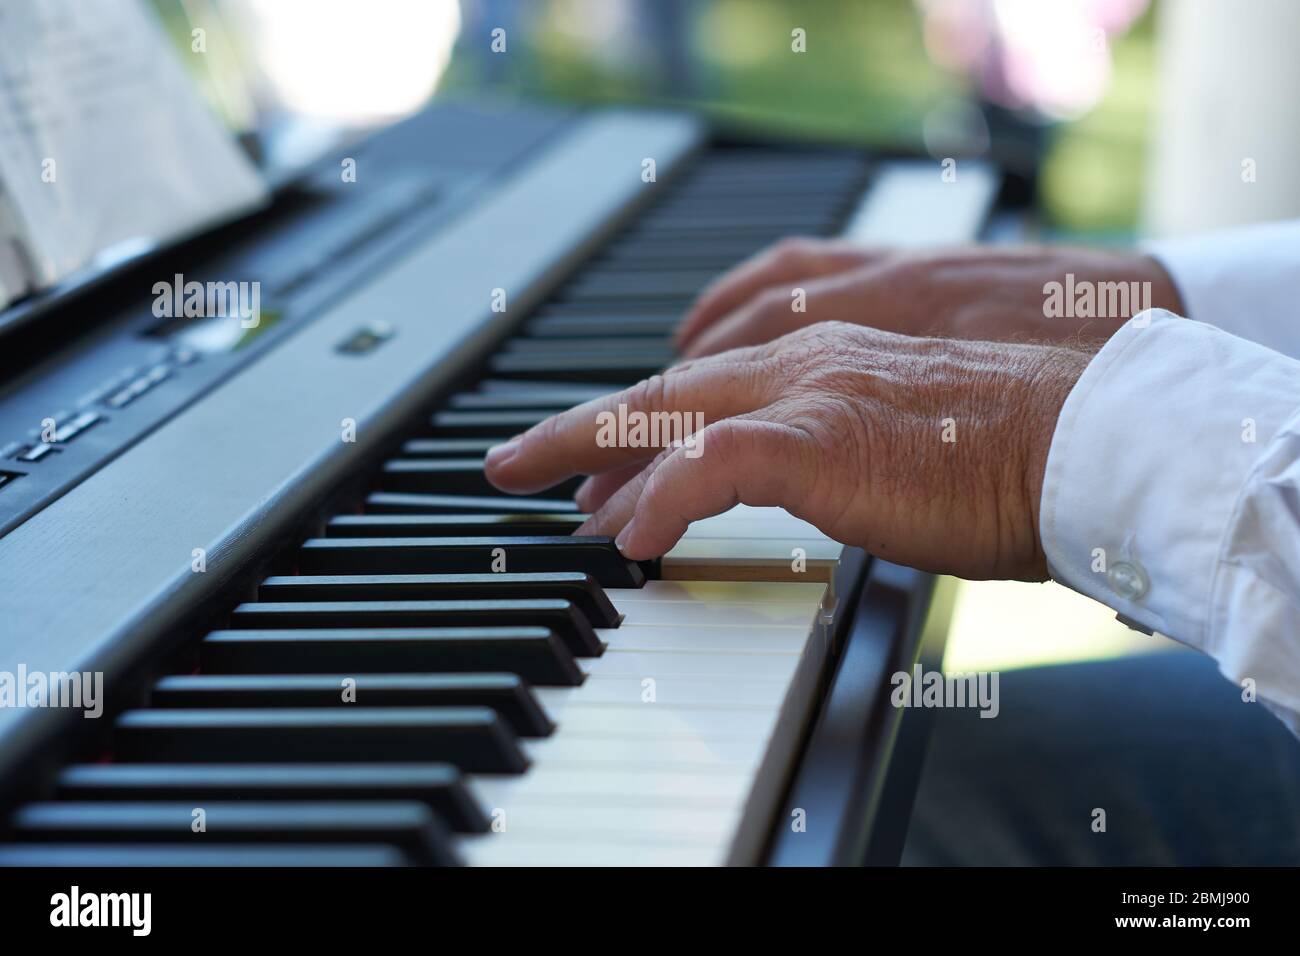 Close up photo of the hands of a white caucasian man wearing a white shirt playing an electric piano keyboard outdoors. Stock Photo